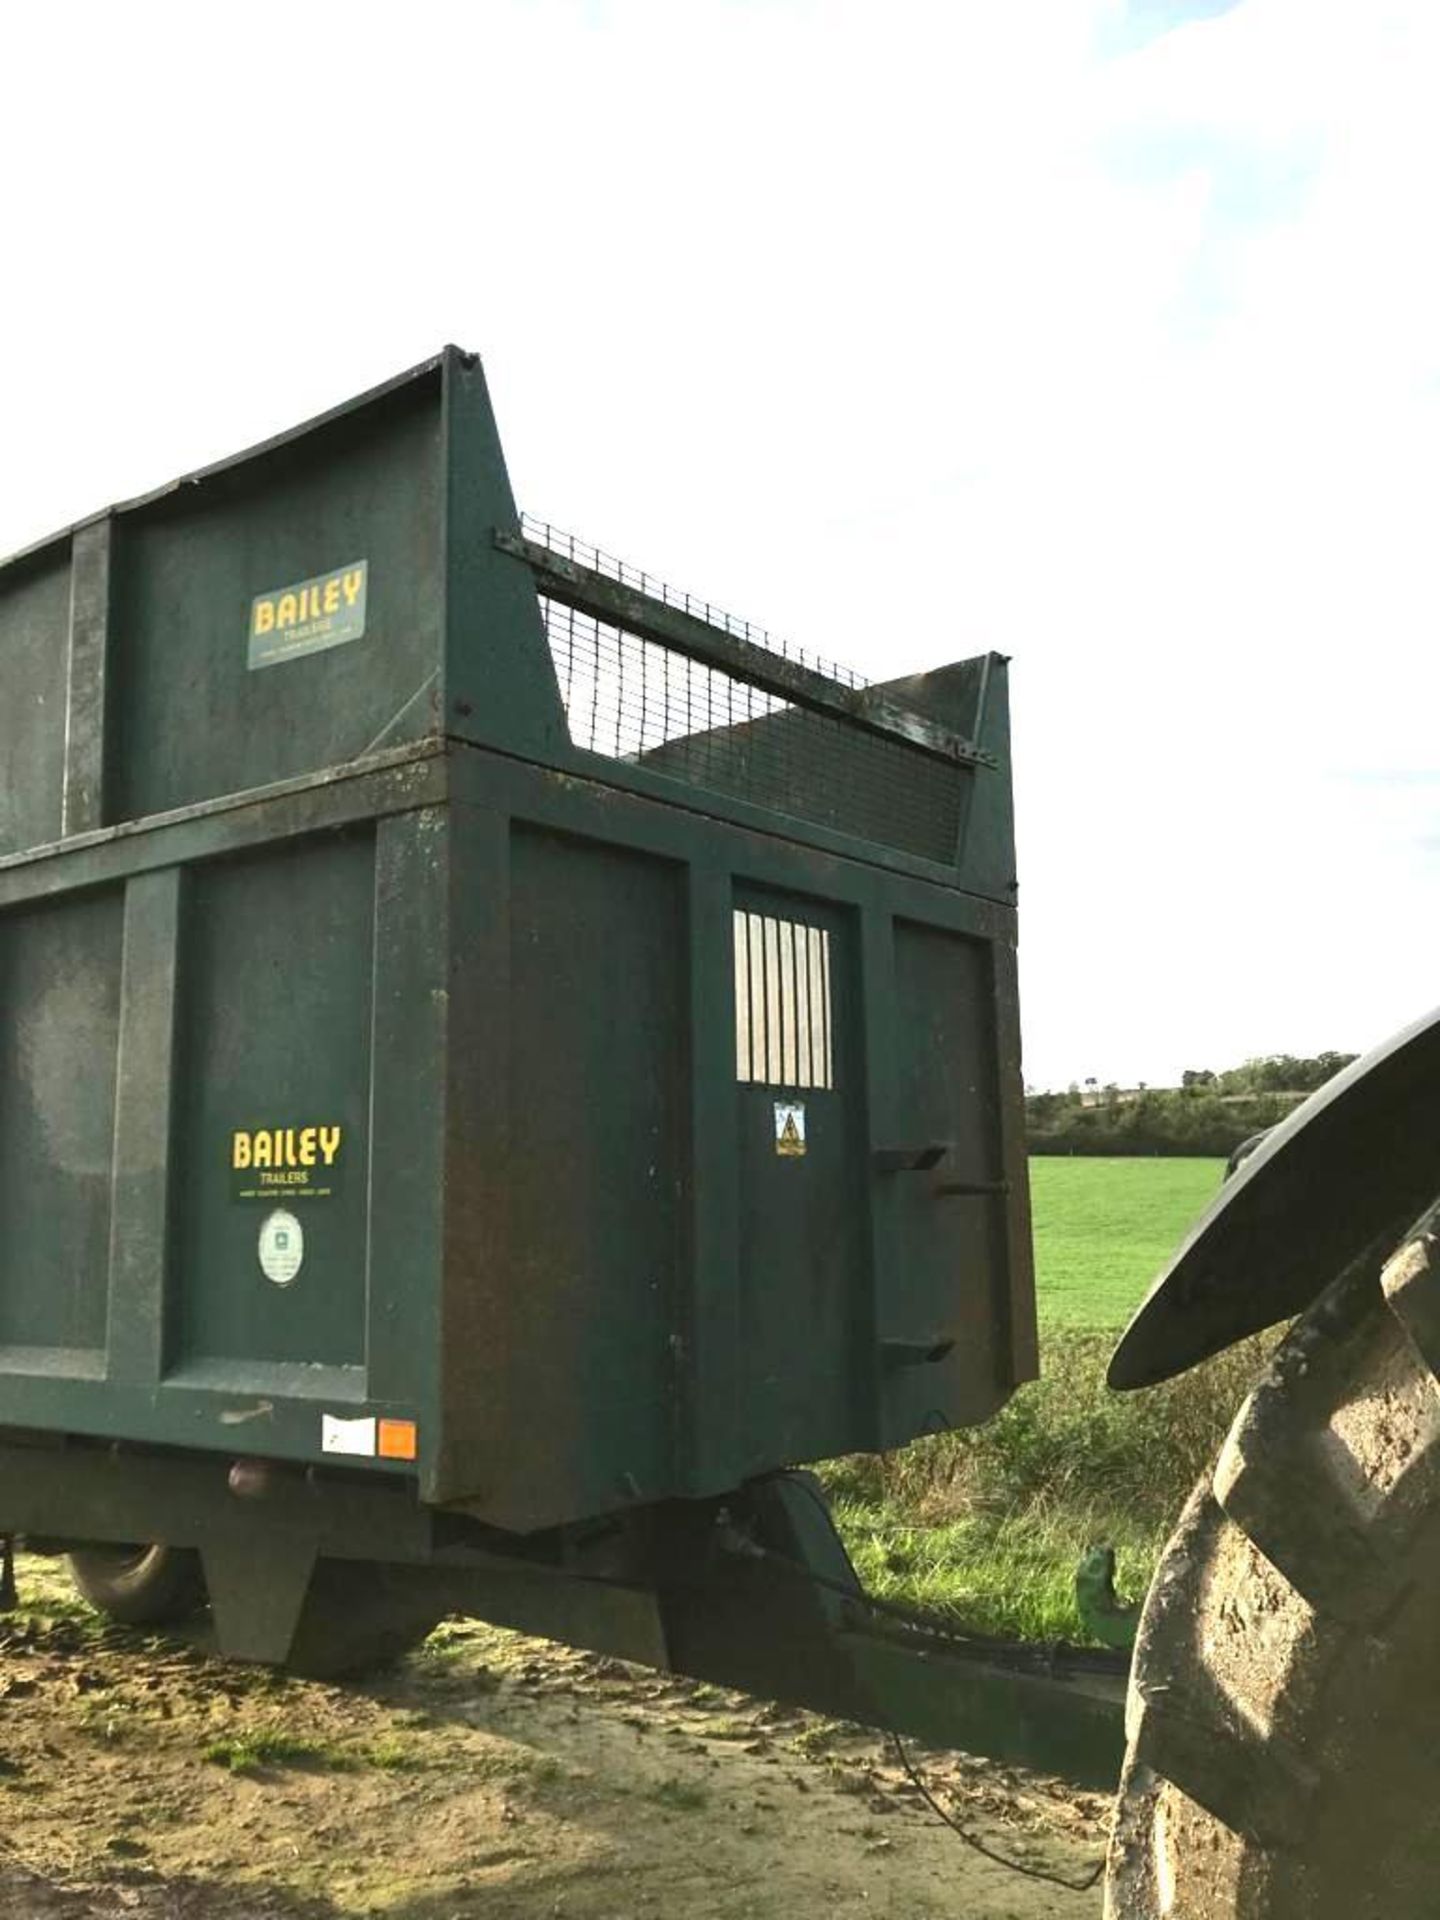 Bailey Silage/Grain Trailer, 10 Tonne - Image 2 of 10